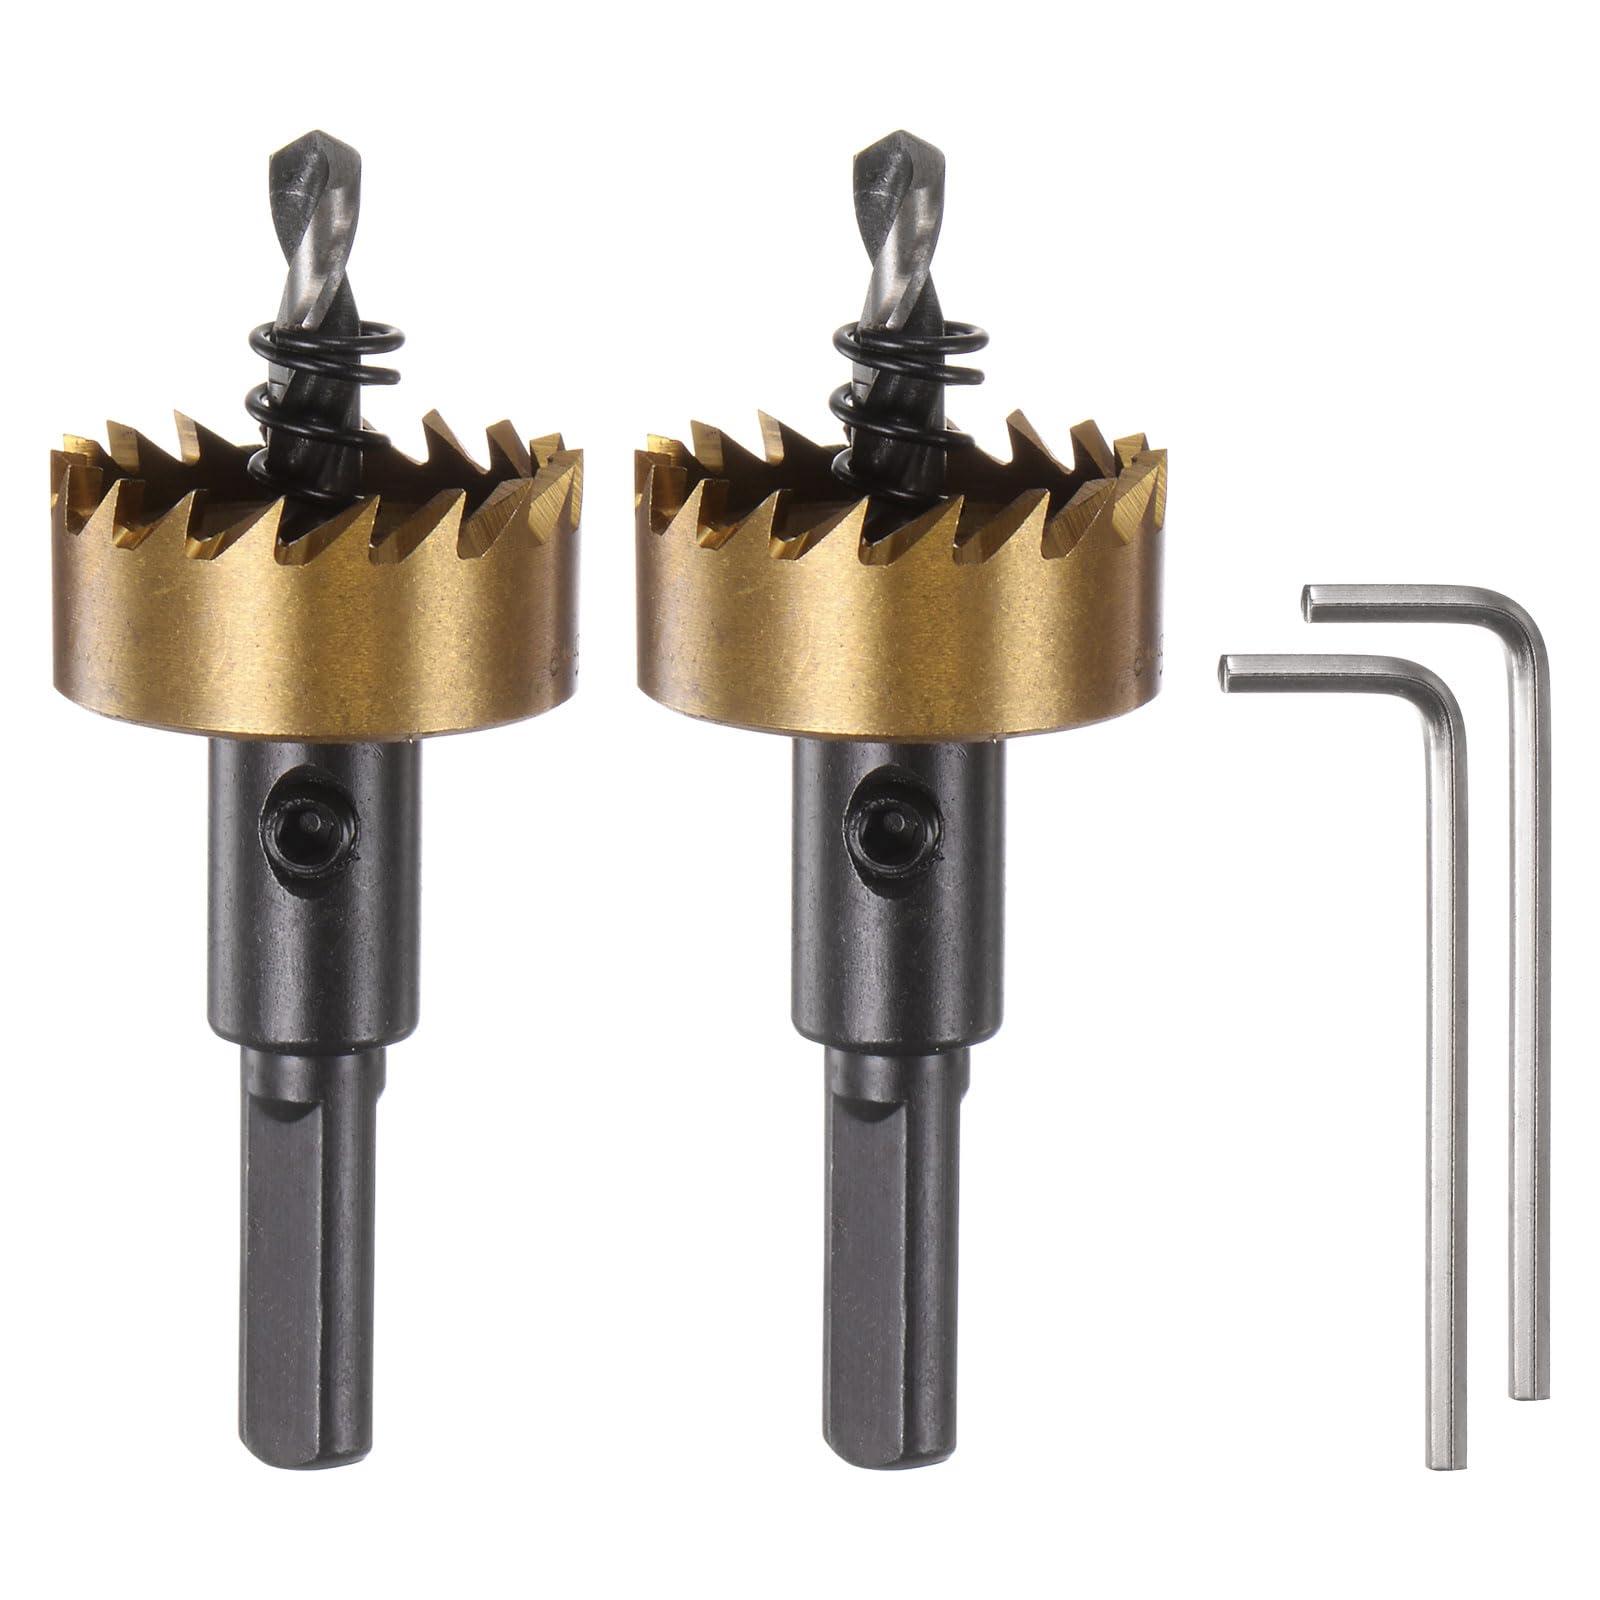 sourcing map 2pcs Hole Saws 28mm (1-1/8") M35 HSS (High Speed Steel) Titanium Coated Drill Bits Cutters Openers for Stainless Steel Aluminum Alloy Metal Wood Plastic 0